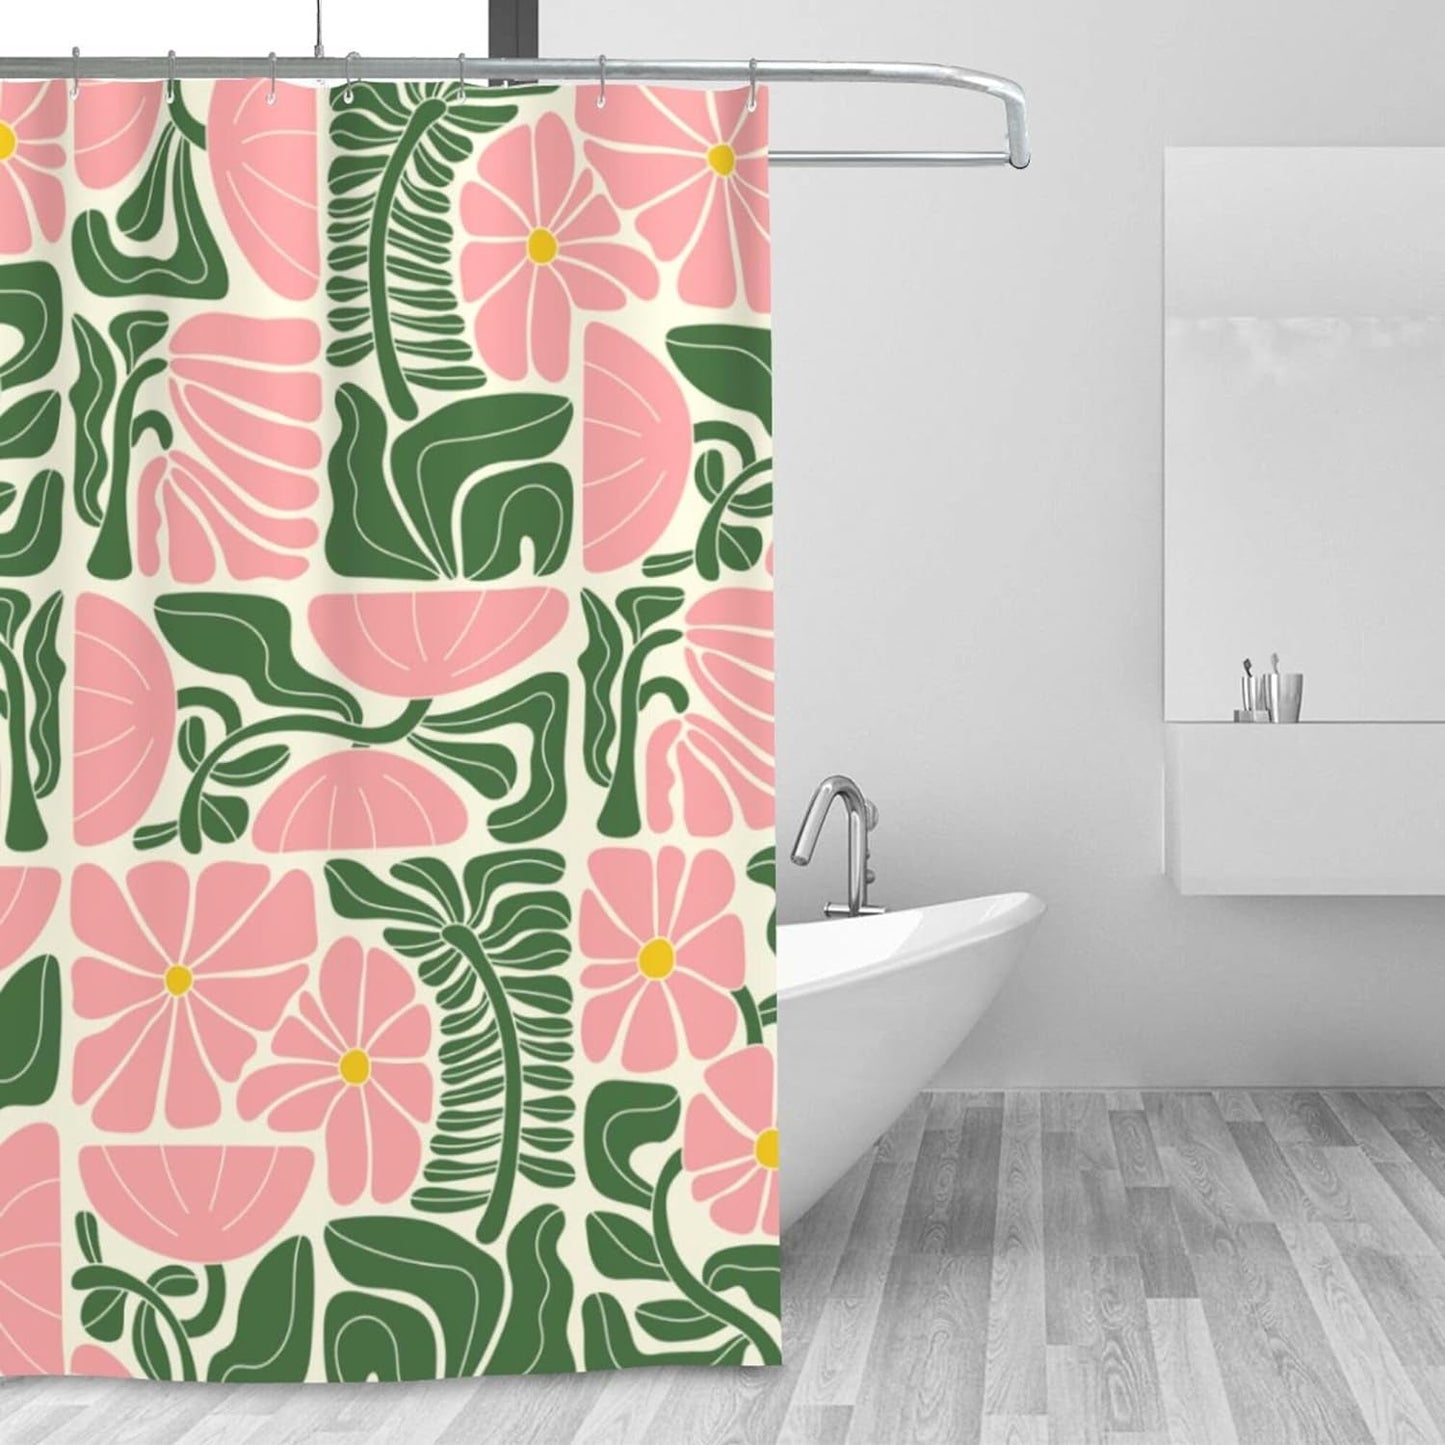 Mid Century Modern Abstract Geometric Boho Shower Curtains for Bathroom, Cute Pink Floral Bathroom Shower Curtain, Vintage Bath Curtain, Waterproof Fabric Shower Curtain